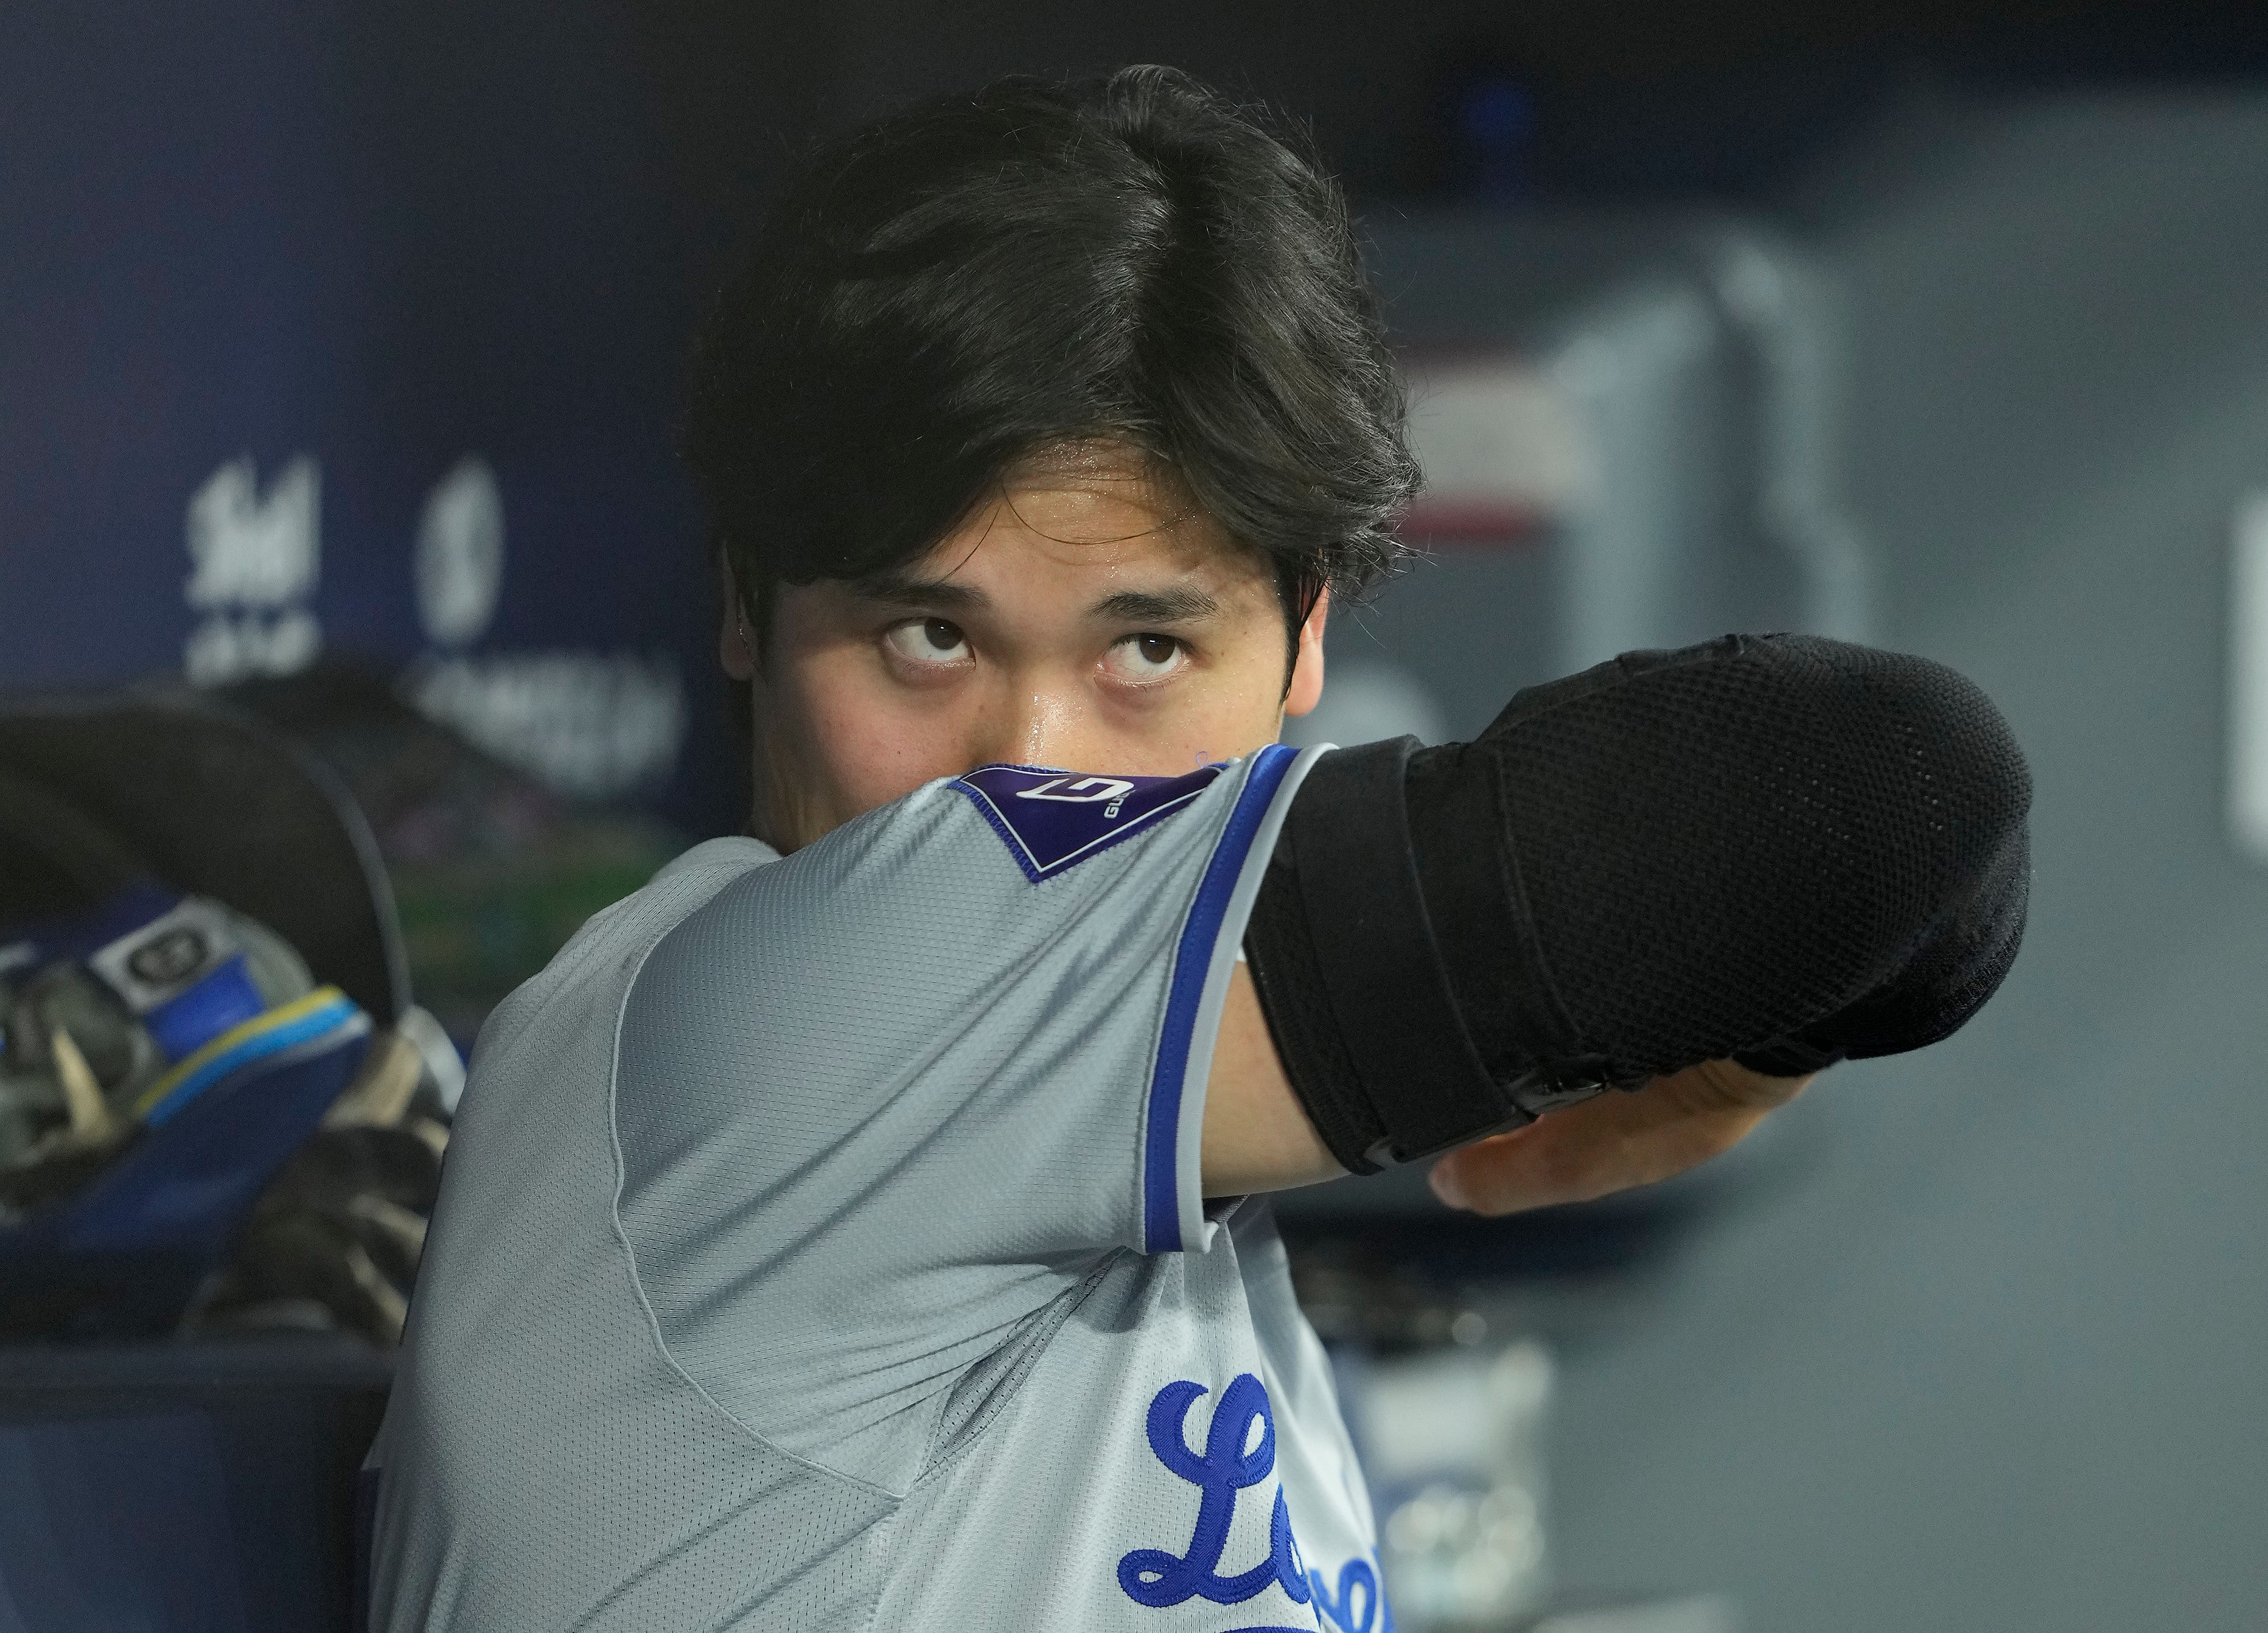 Shohei Ohtani was recently involved in a scandal involving him and former interpreter Ippei Mizuhara with a sports betting organization. However, Ohtani has been found not guilty.